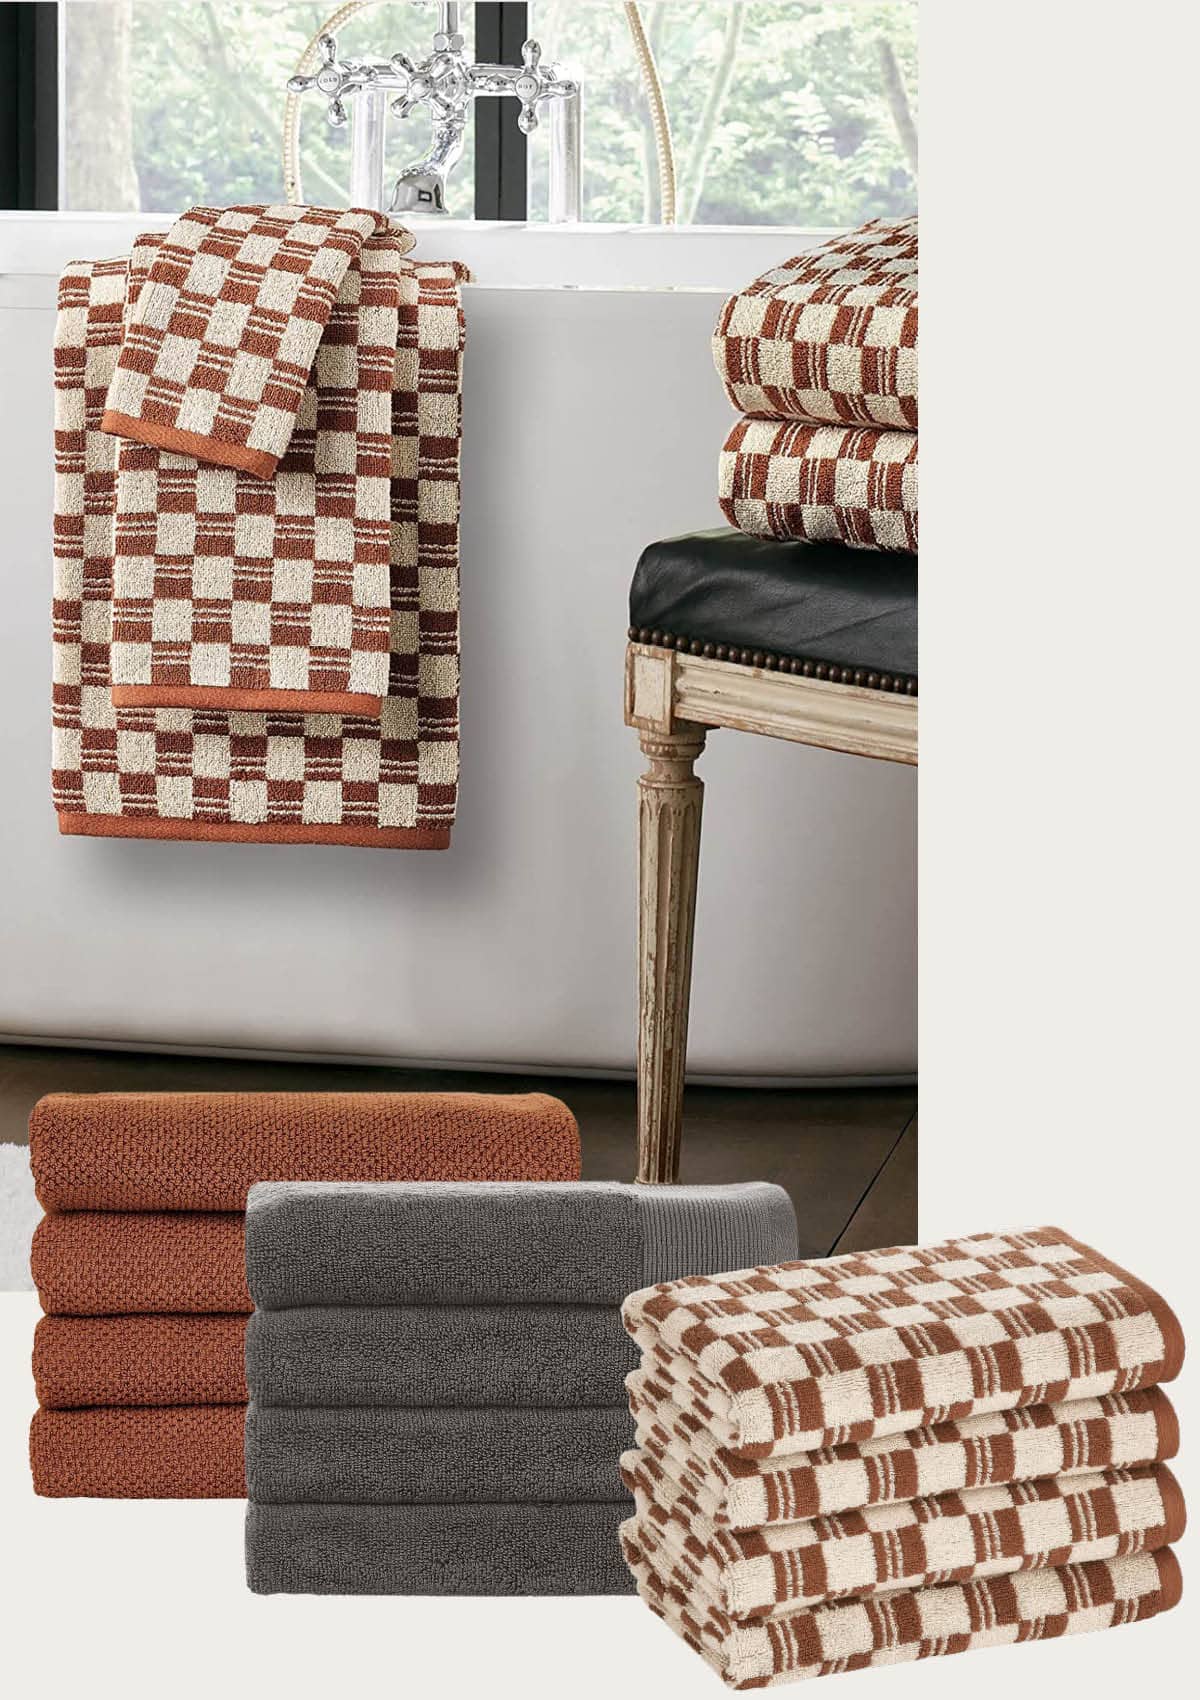 Nate Berkus Home Decor Bathroom Collection On Amazon - Trendy checkered towels for the bathroom in gray and rust